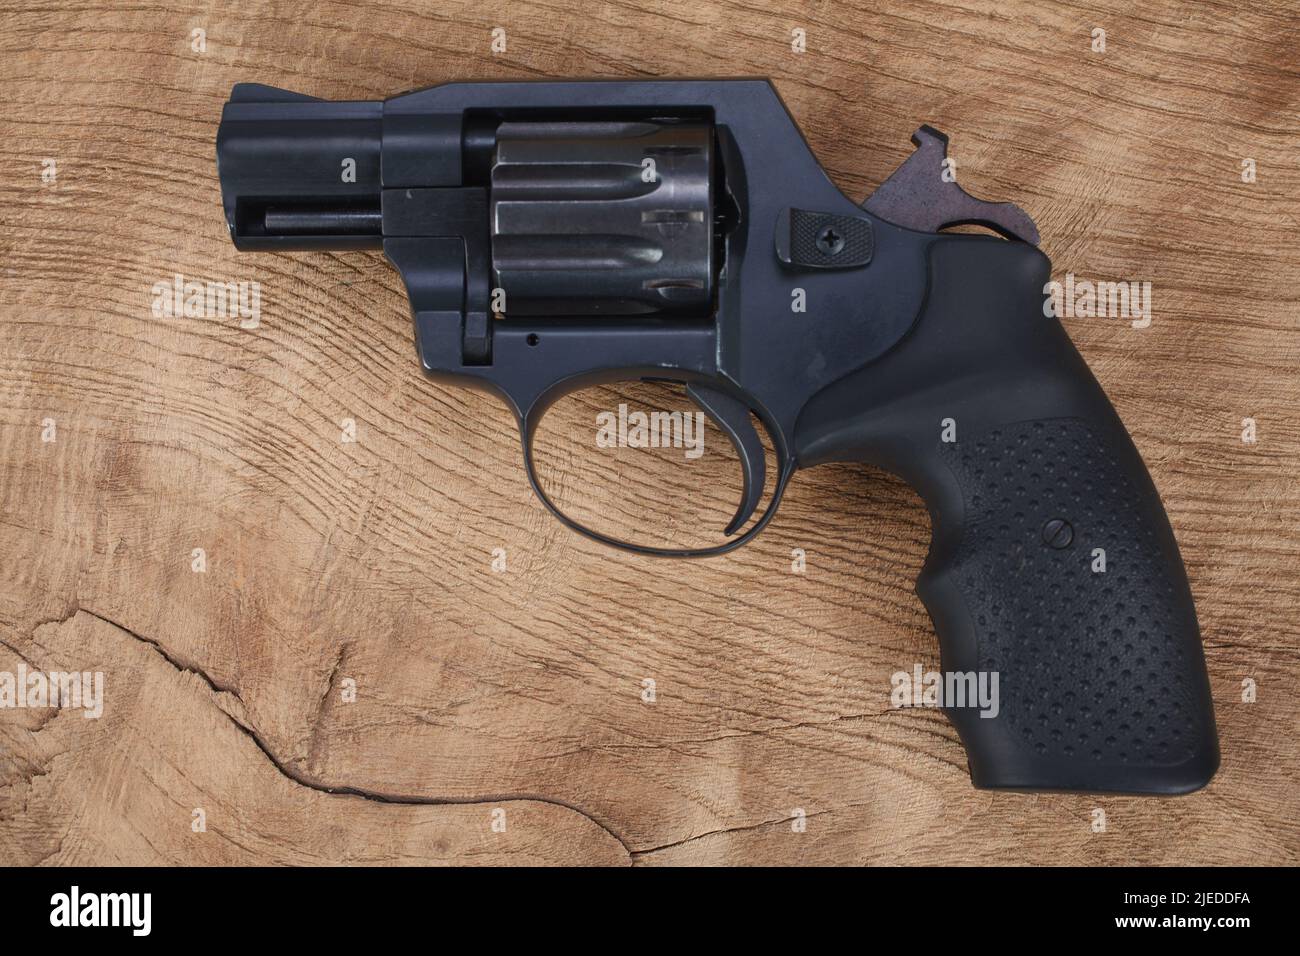 Cocked and locked revolver on wooden table background Stock Photo